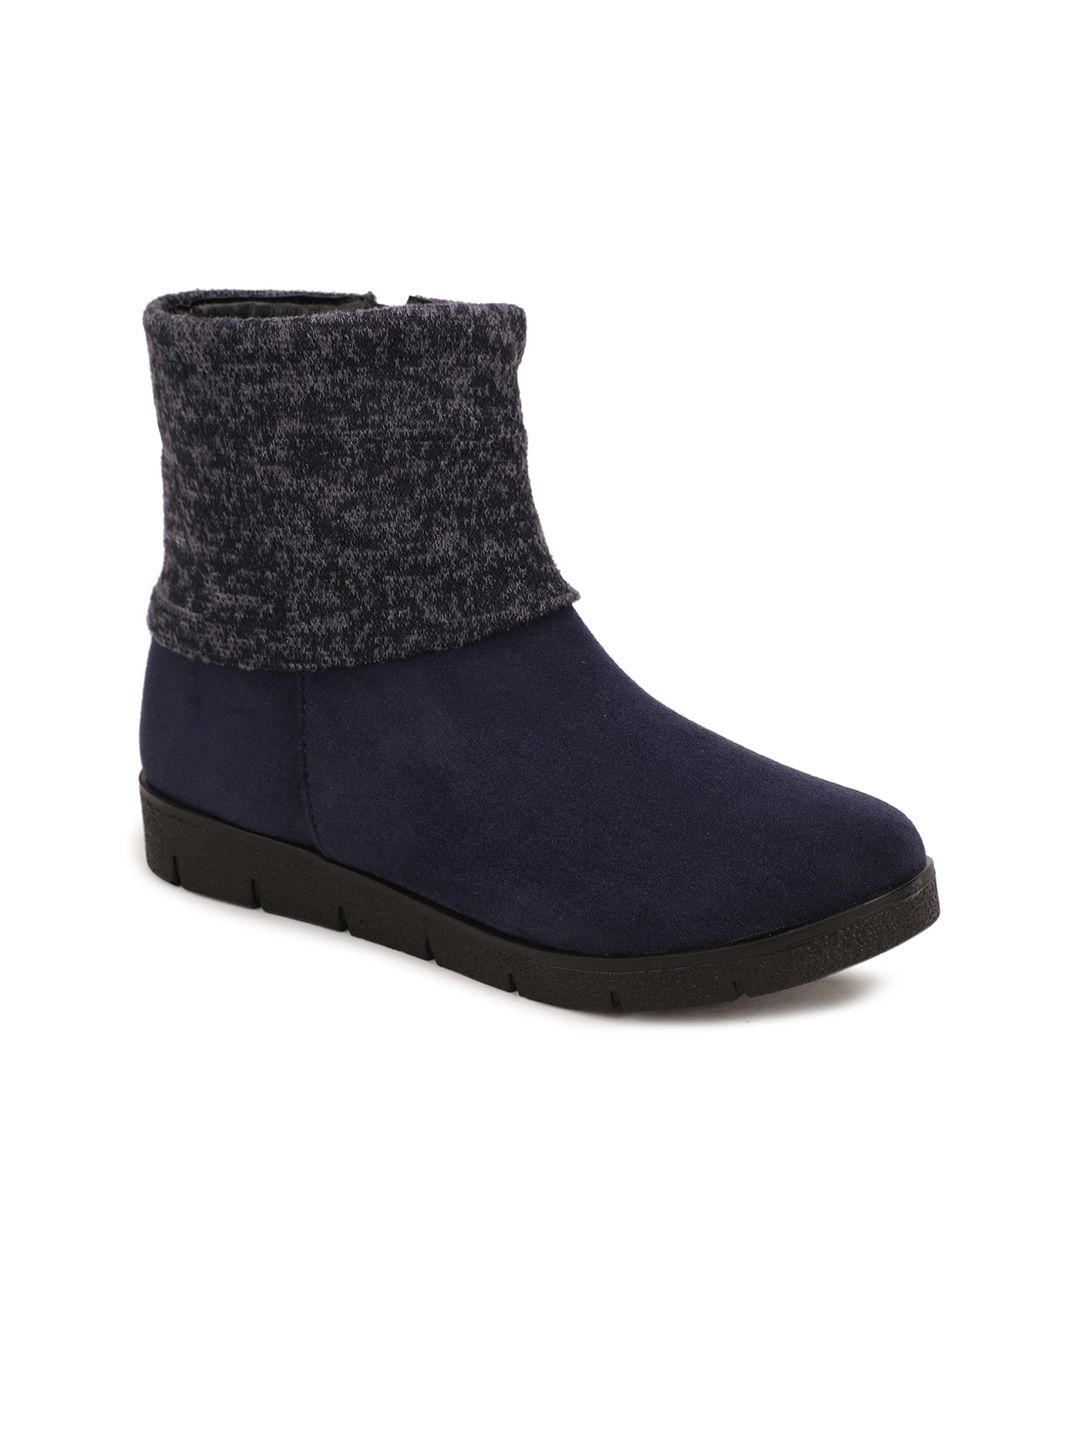 Bruno Manetti Women Navy Blue Suede Flat Boots Price in India